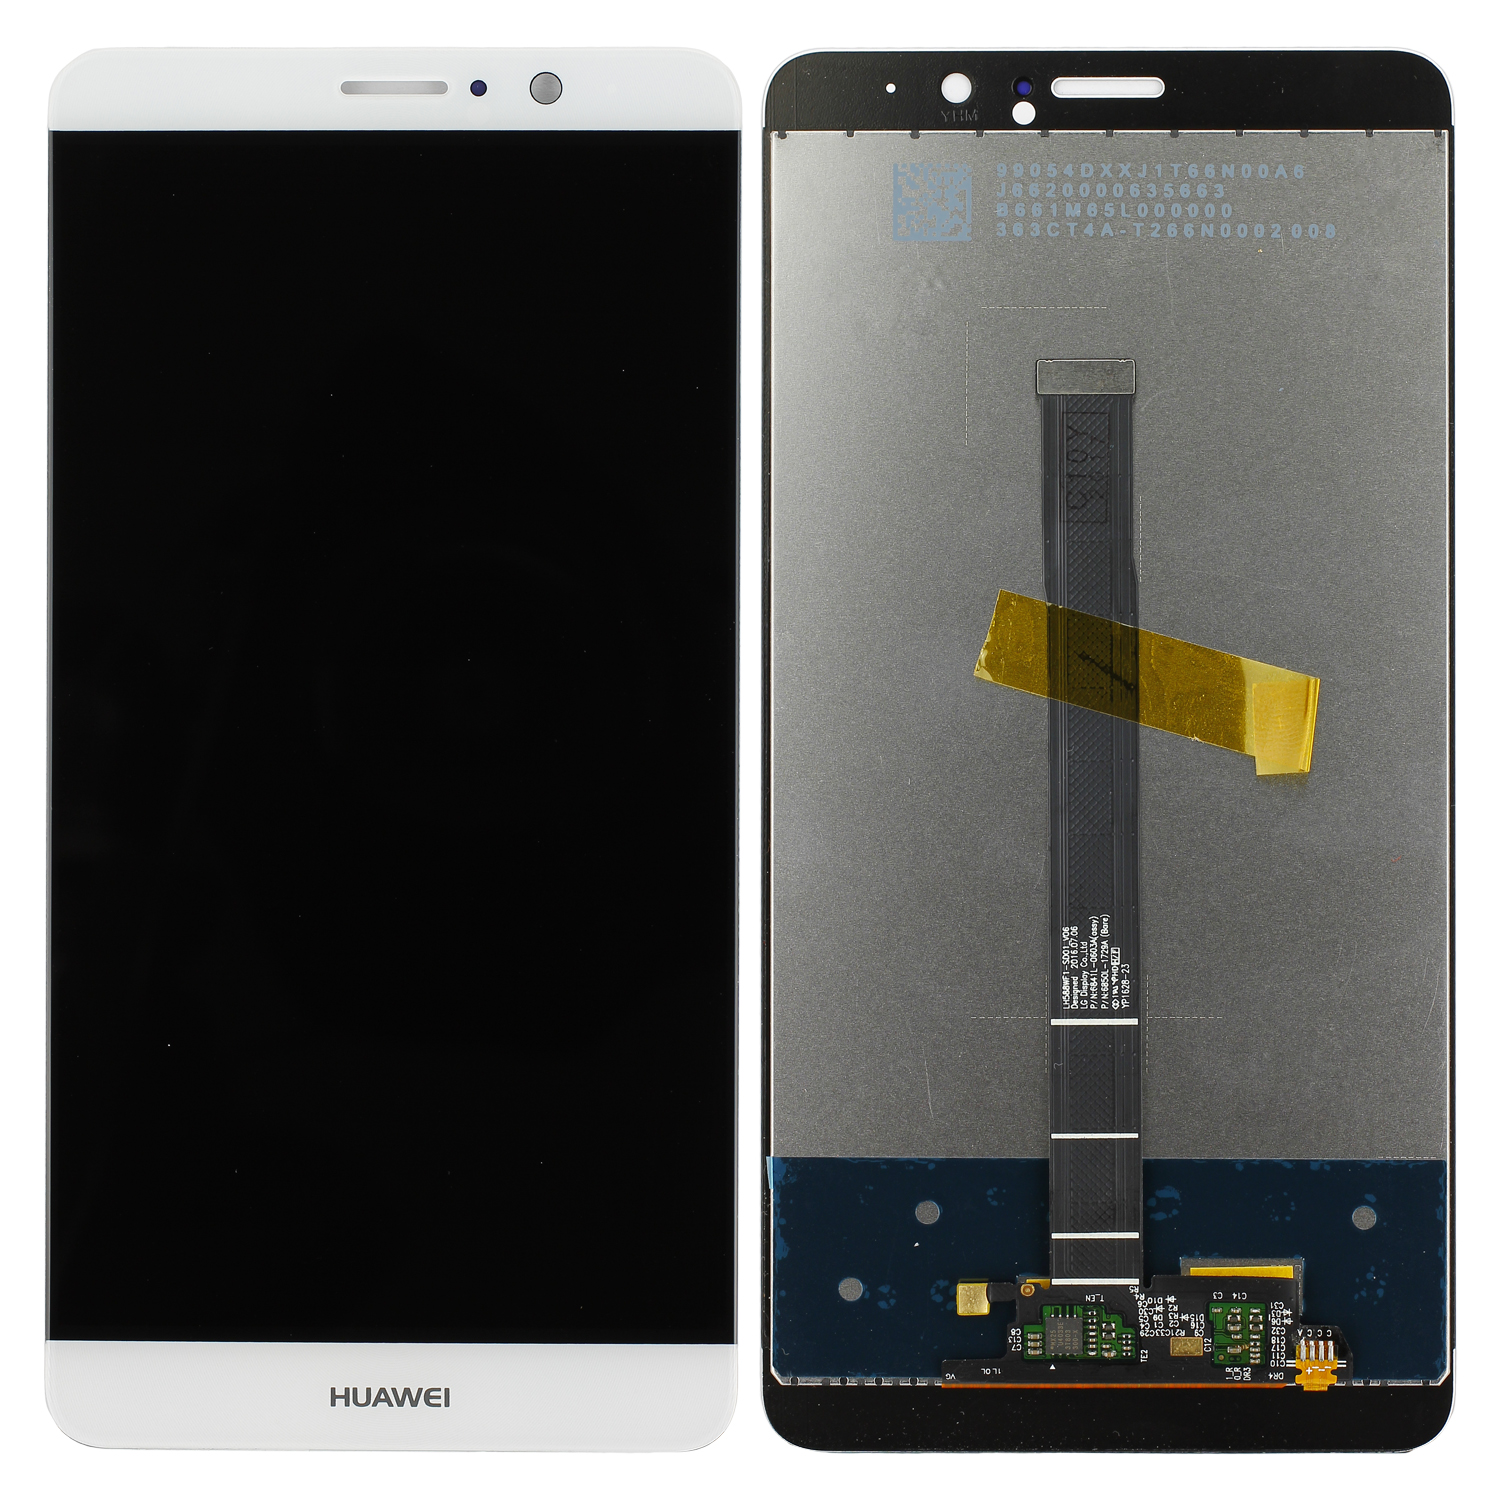 Huawei Mate 9 MHA-L09 LCD Display, White without Display Frame